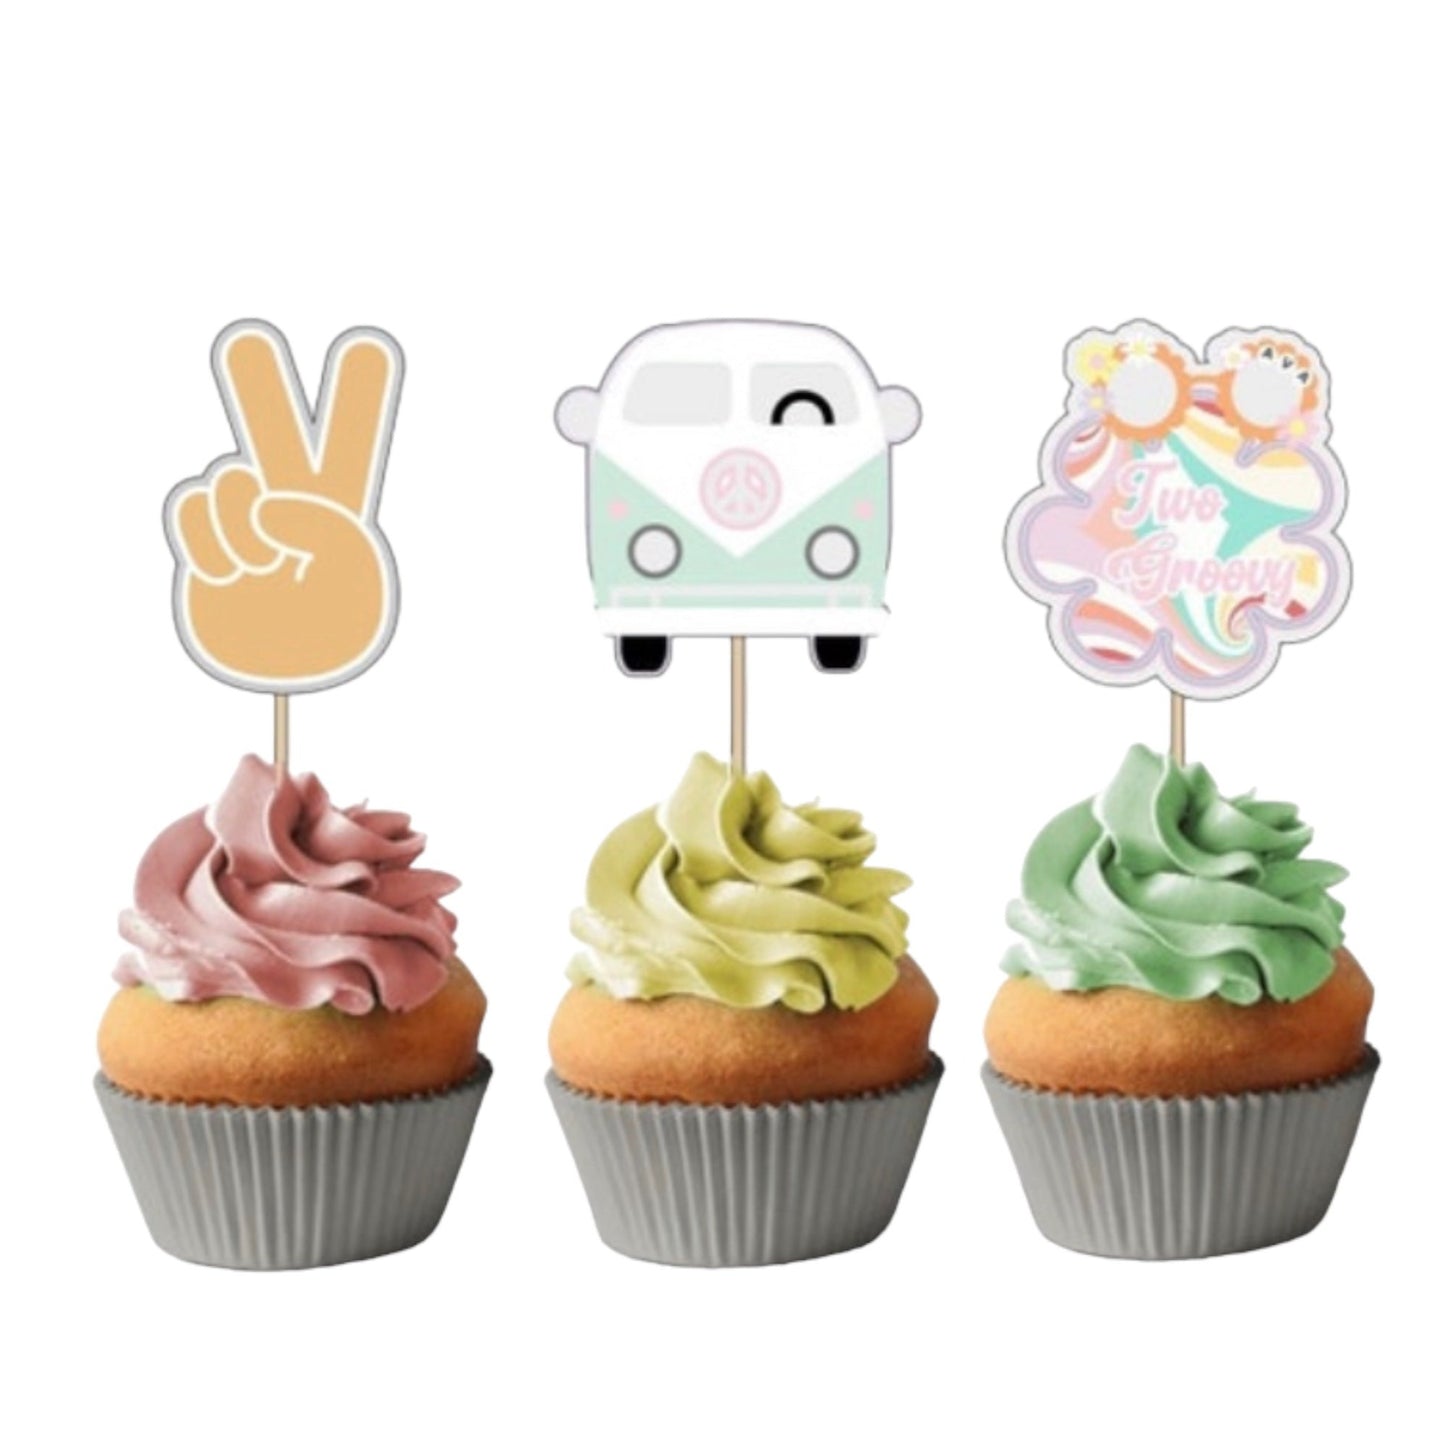 Four ever groovy cupcake topper